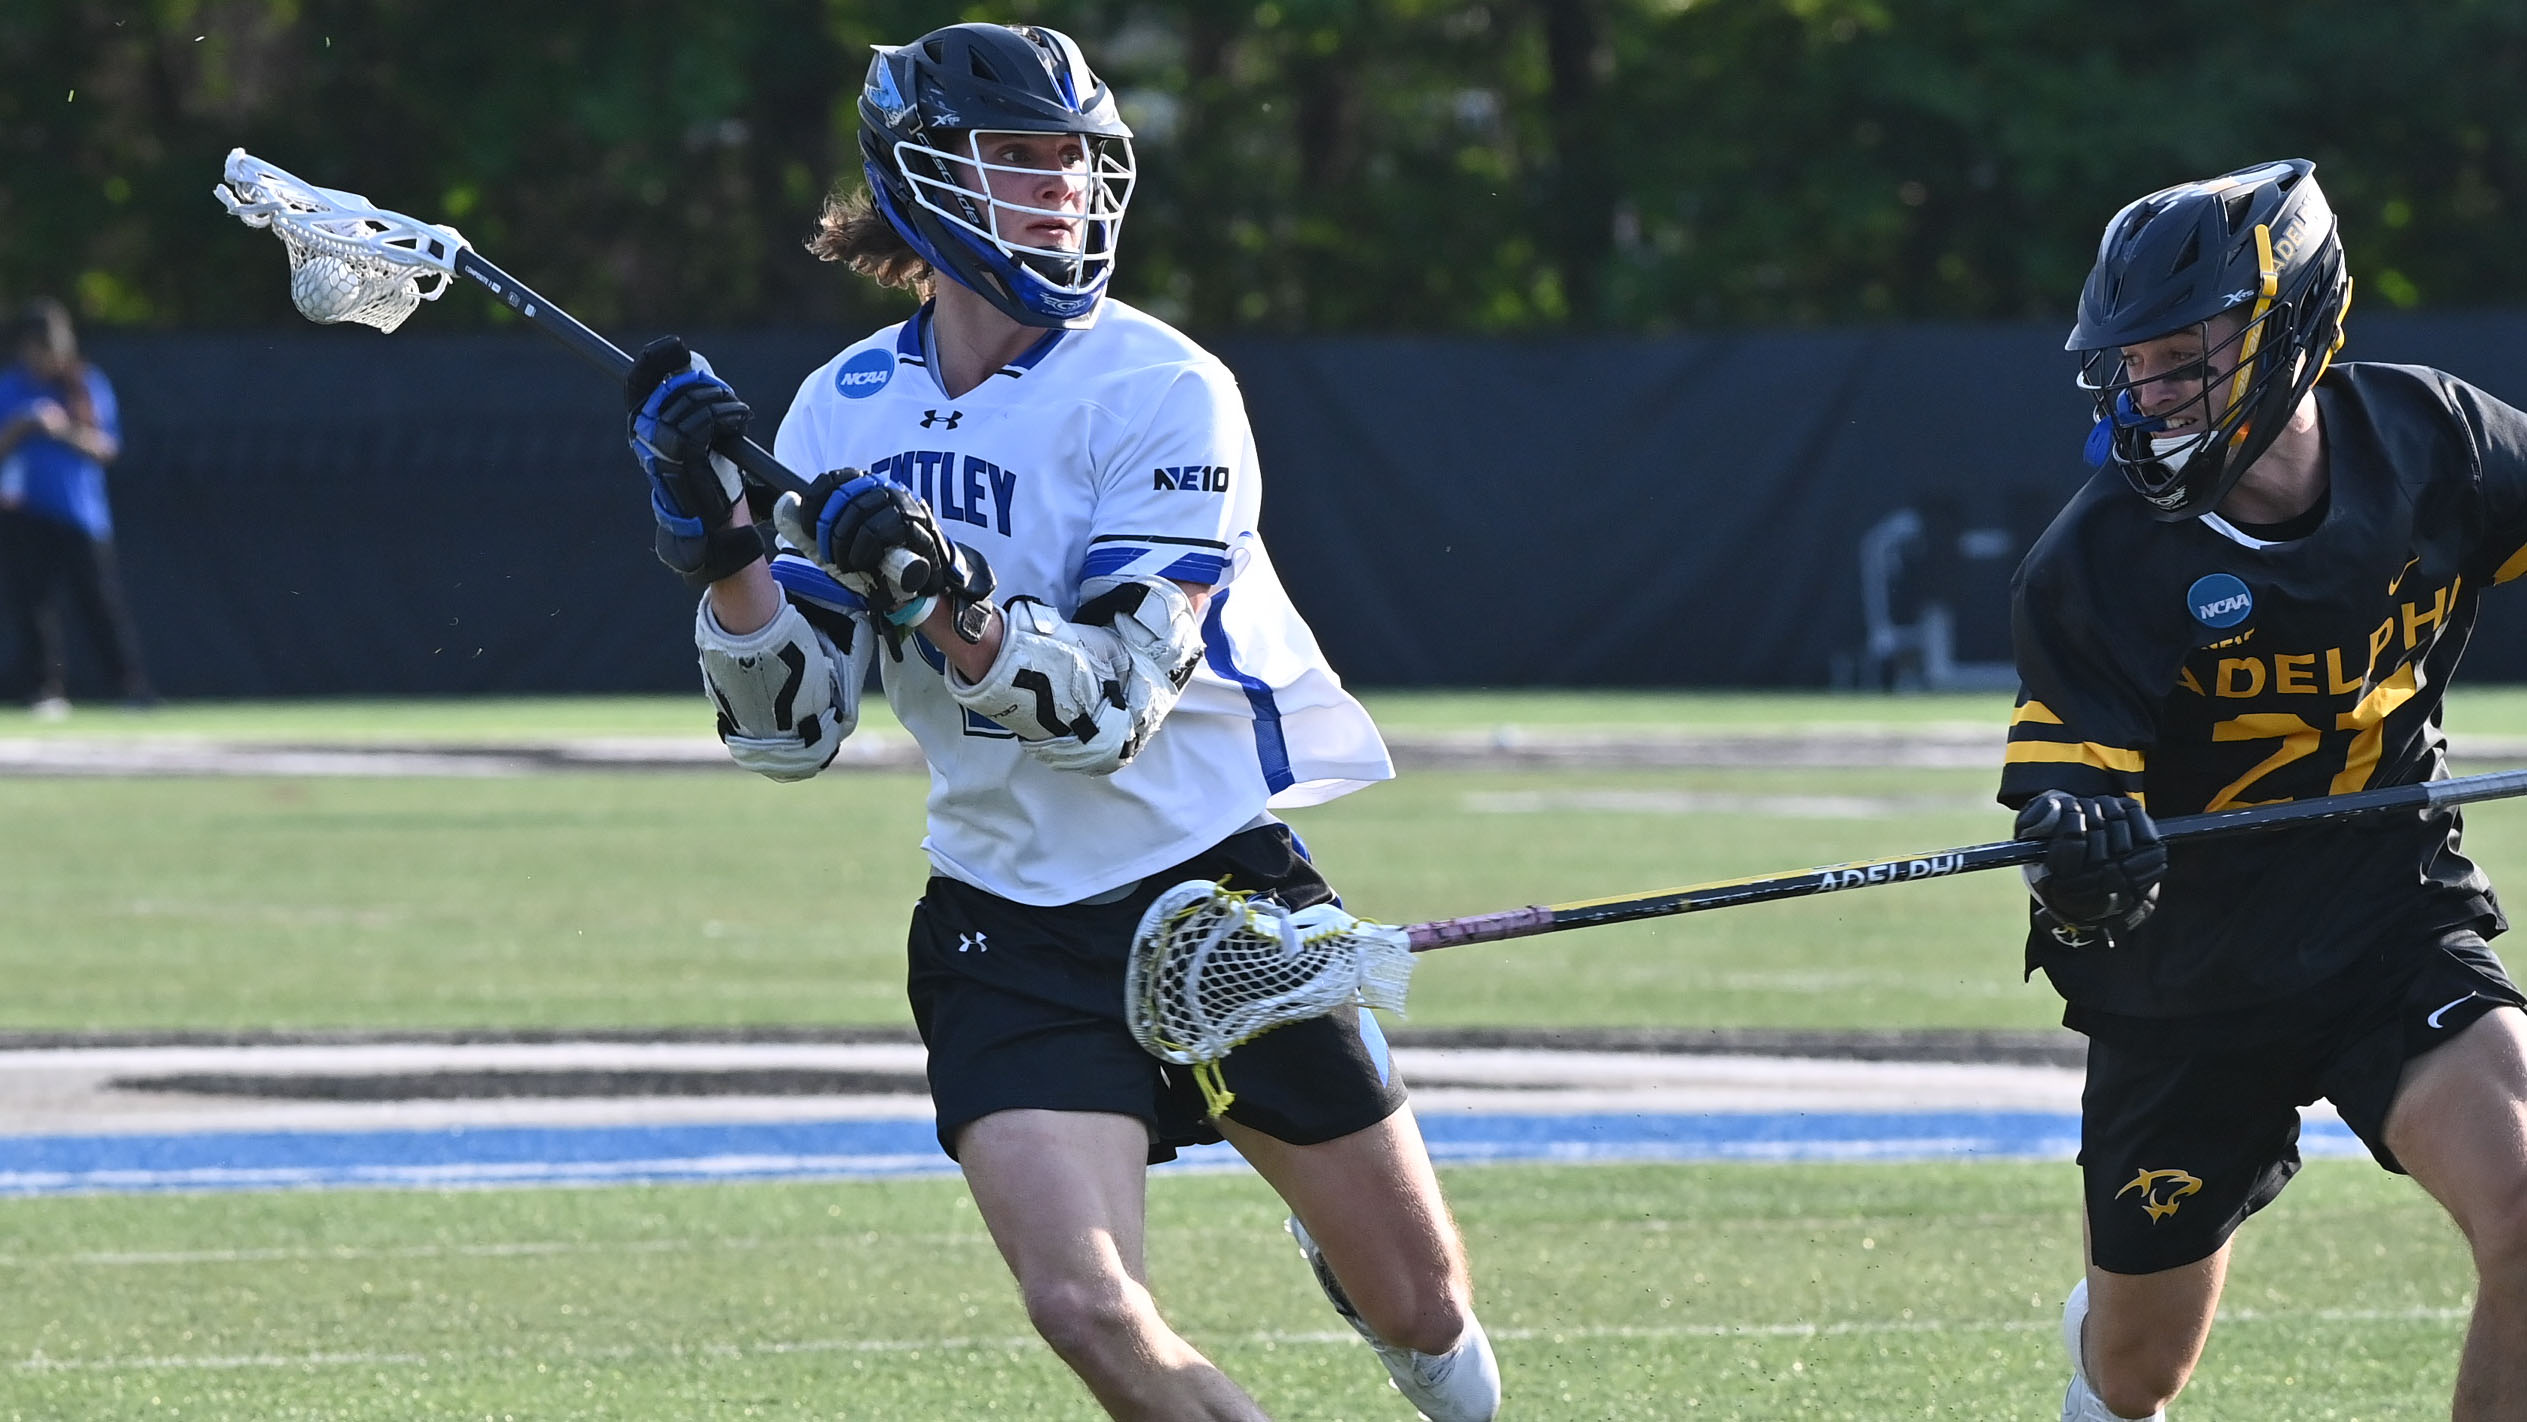 Bentley’s 4th Quarter Rally Falls Just Short as Adelphi Hangs on 9-8 in NCAA 1st Round